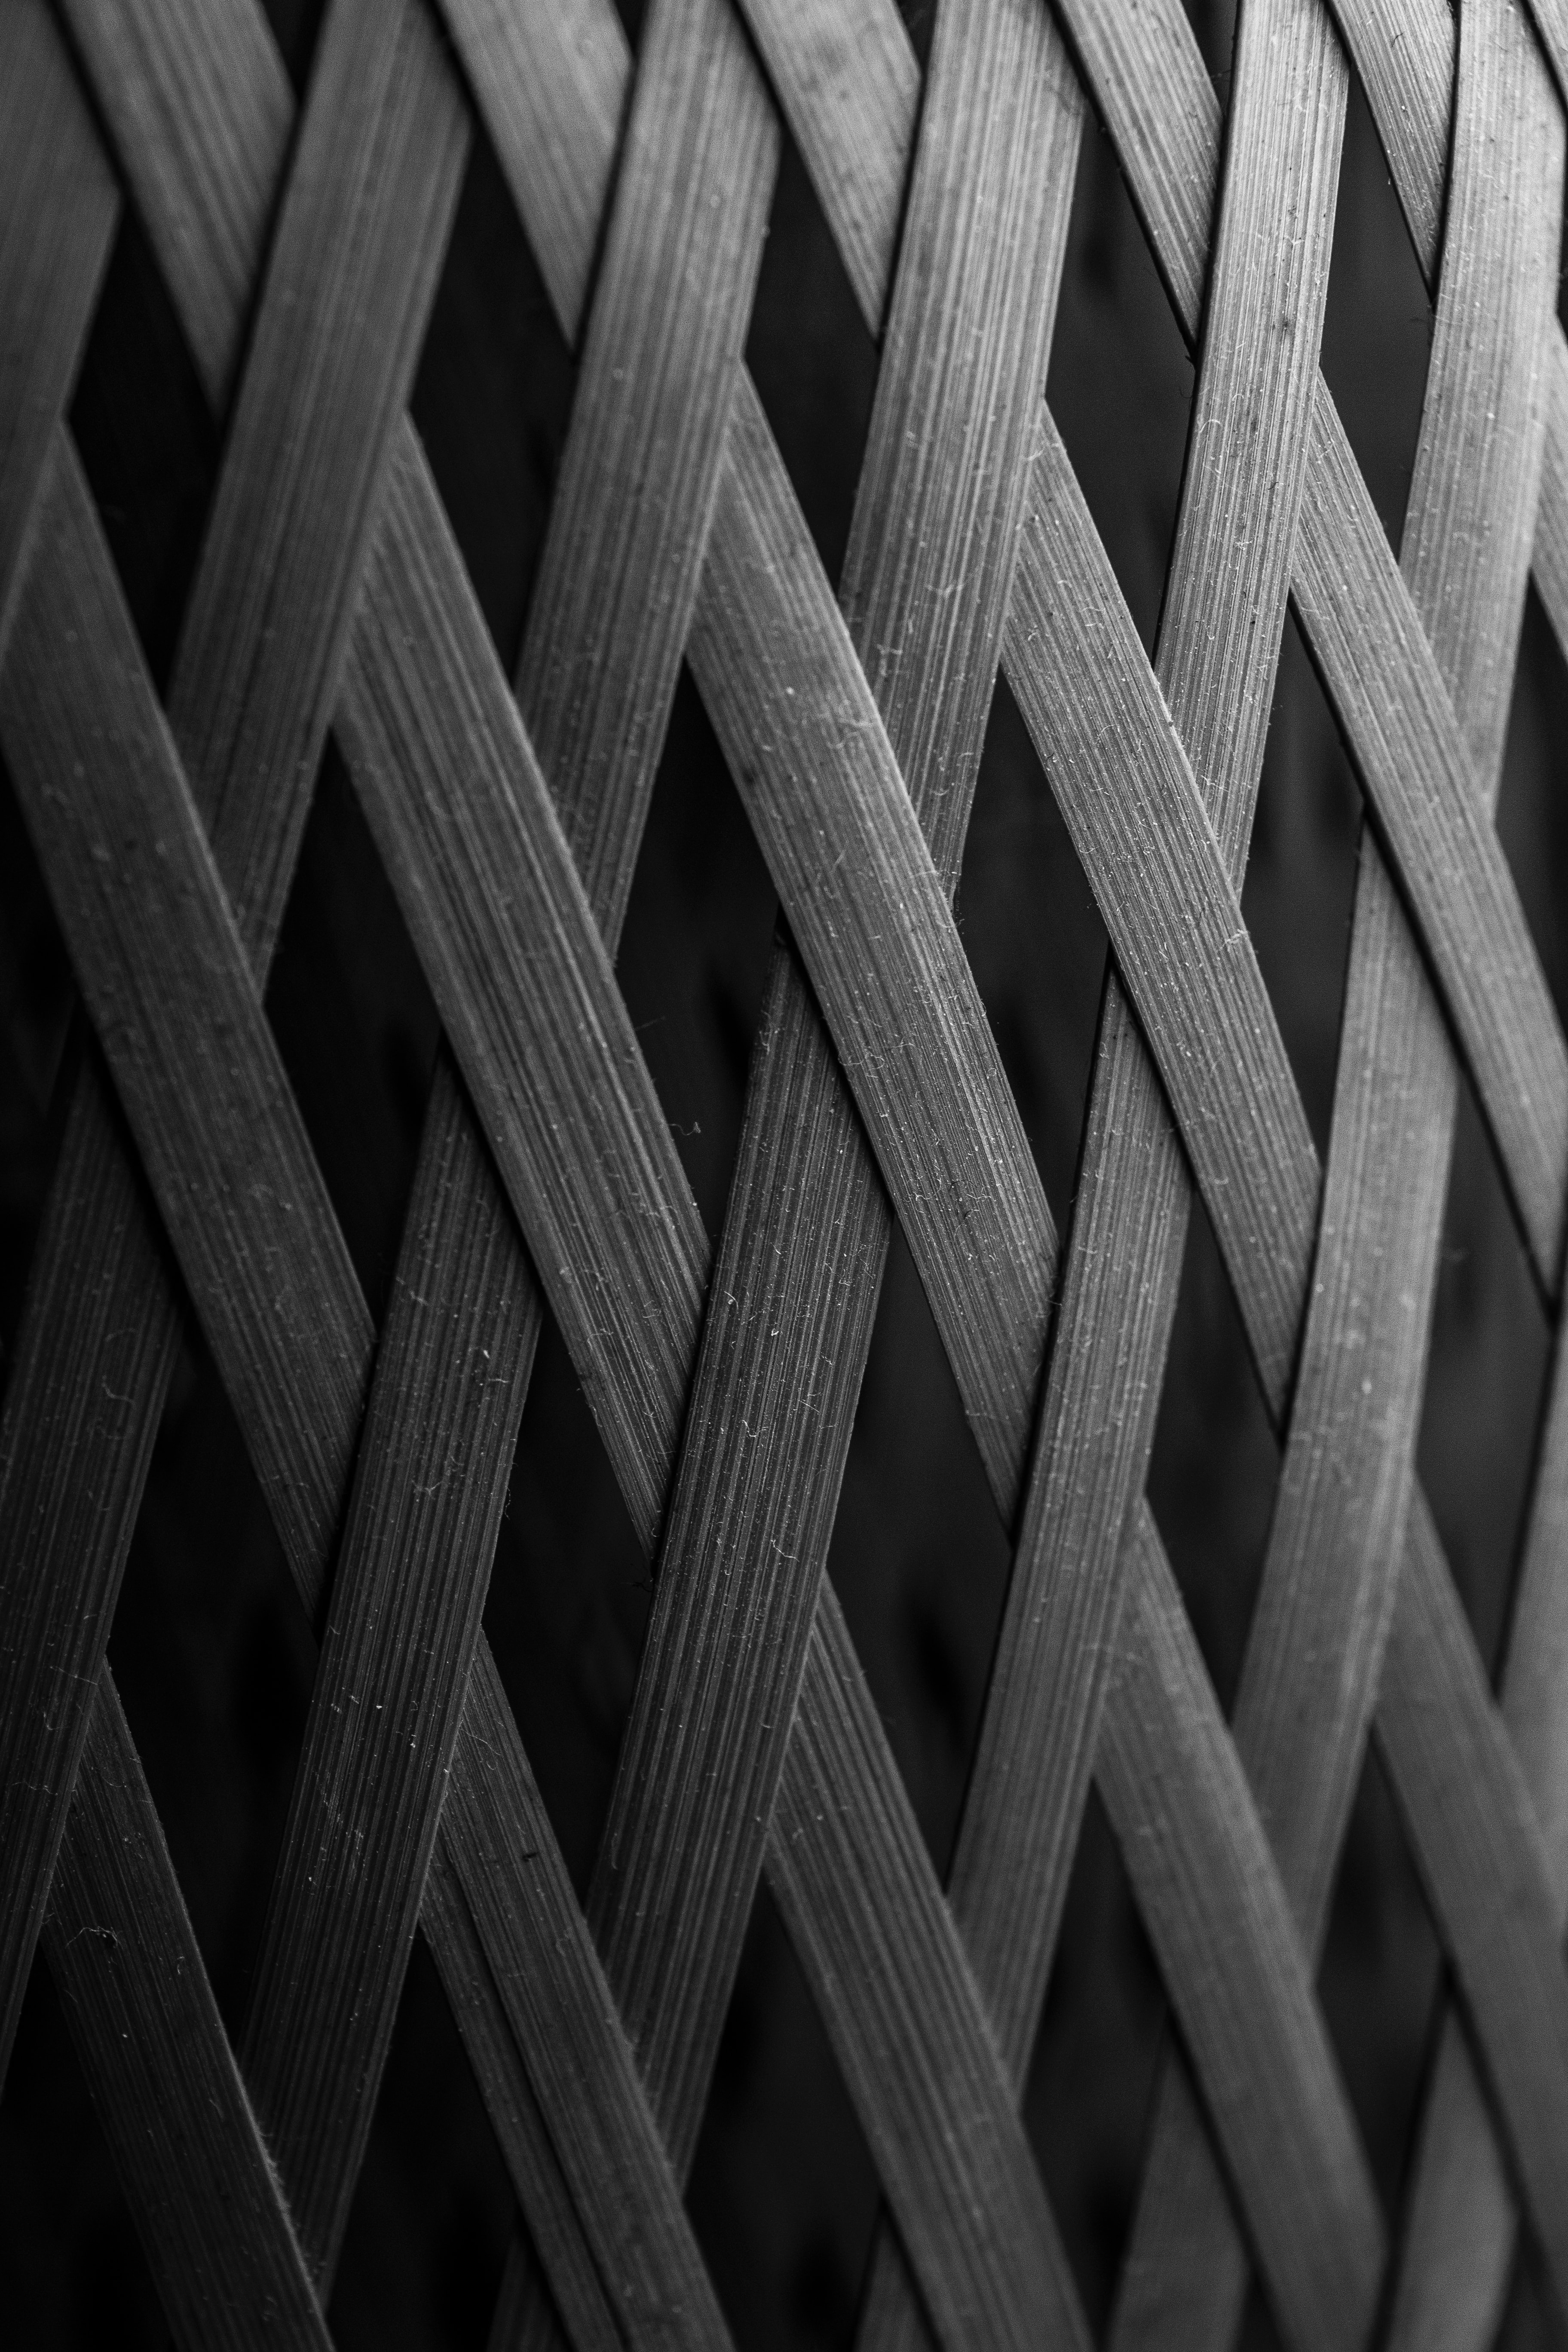 facade, wooden, chb, texture, wood, textures, fence, bw mobile wallpaper